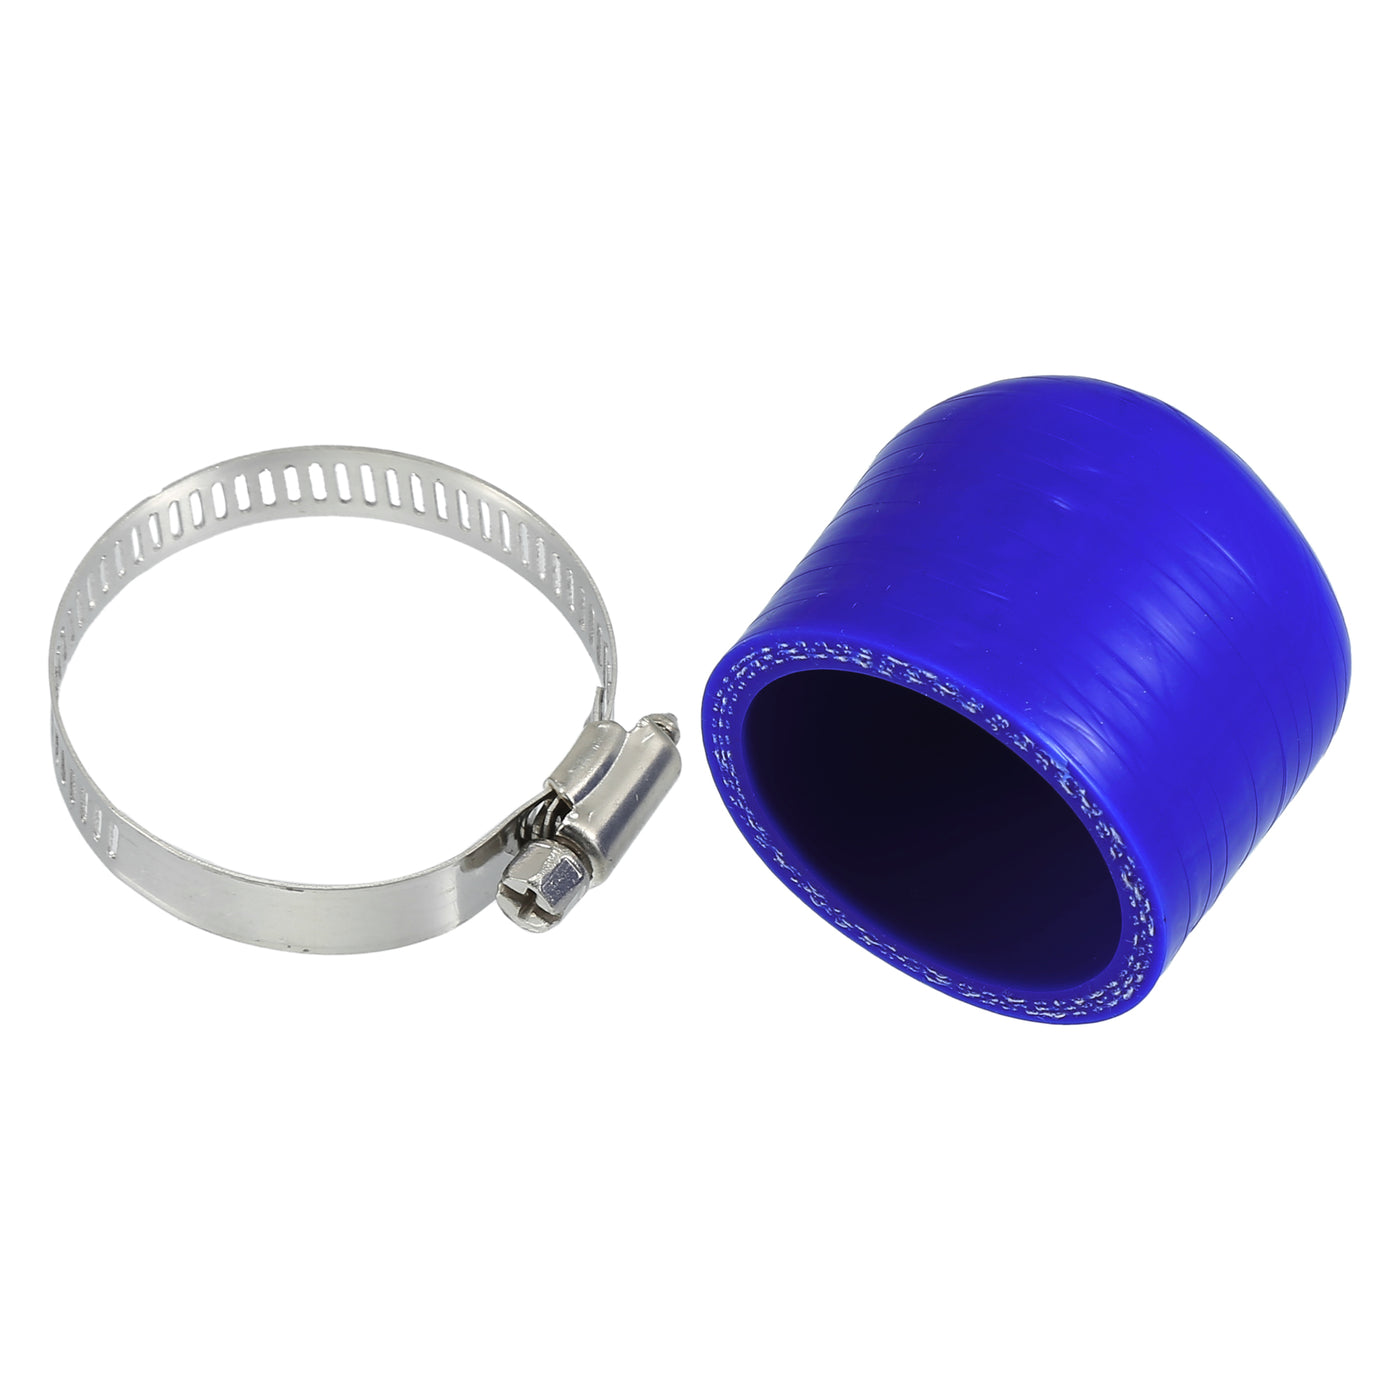 X AUTOHAUX 1 Set 30mm Length 40mm/1.57" ID Blue Car Silicone Rubber Hose End Cap with Clamps Silicone Reinforced Blanking Cap for Bypass Tube Universal